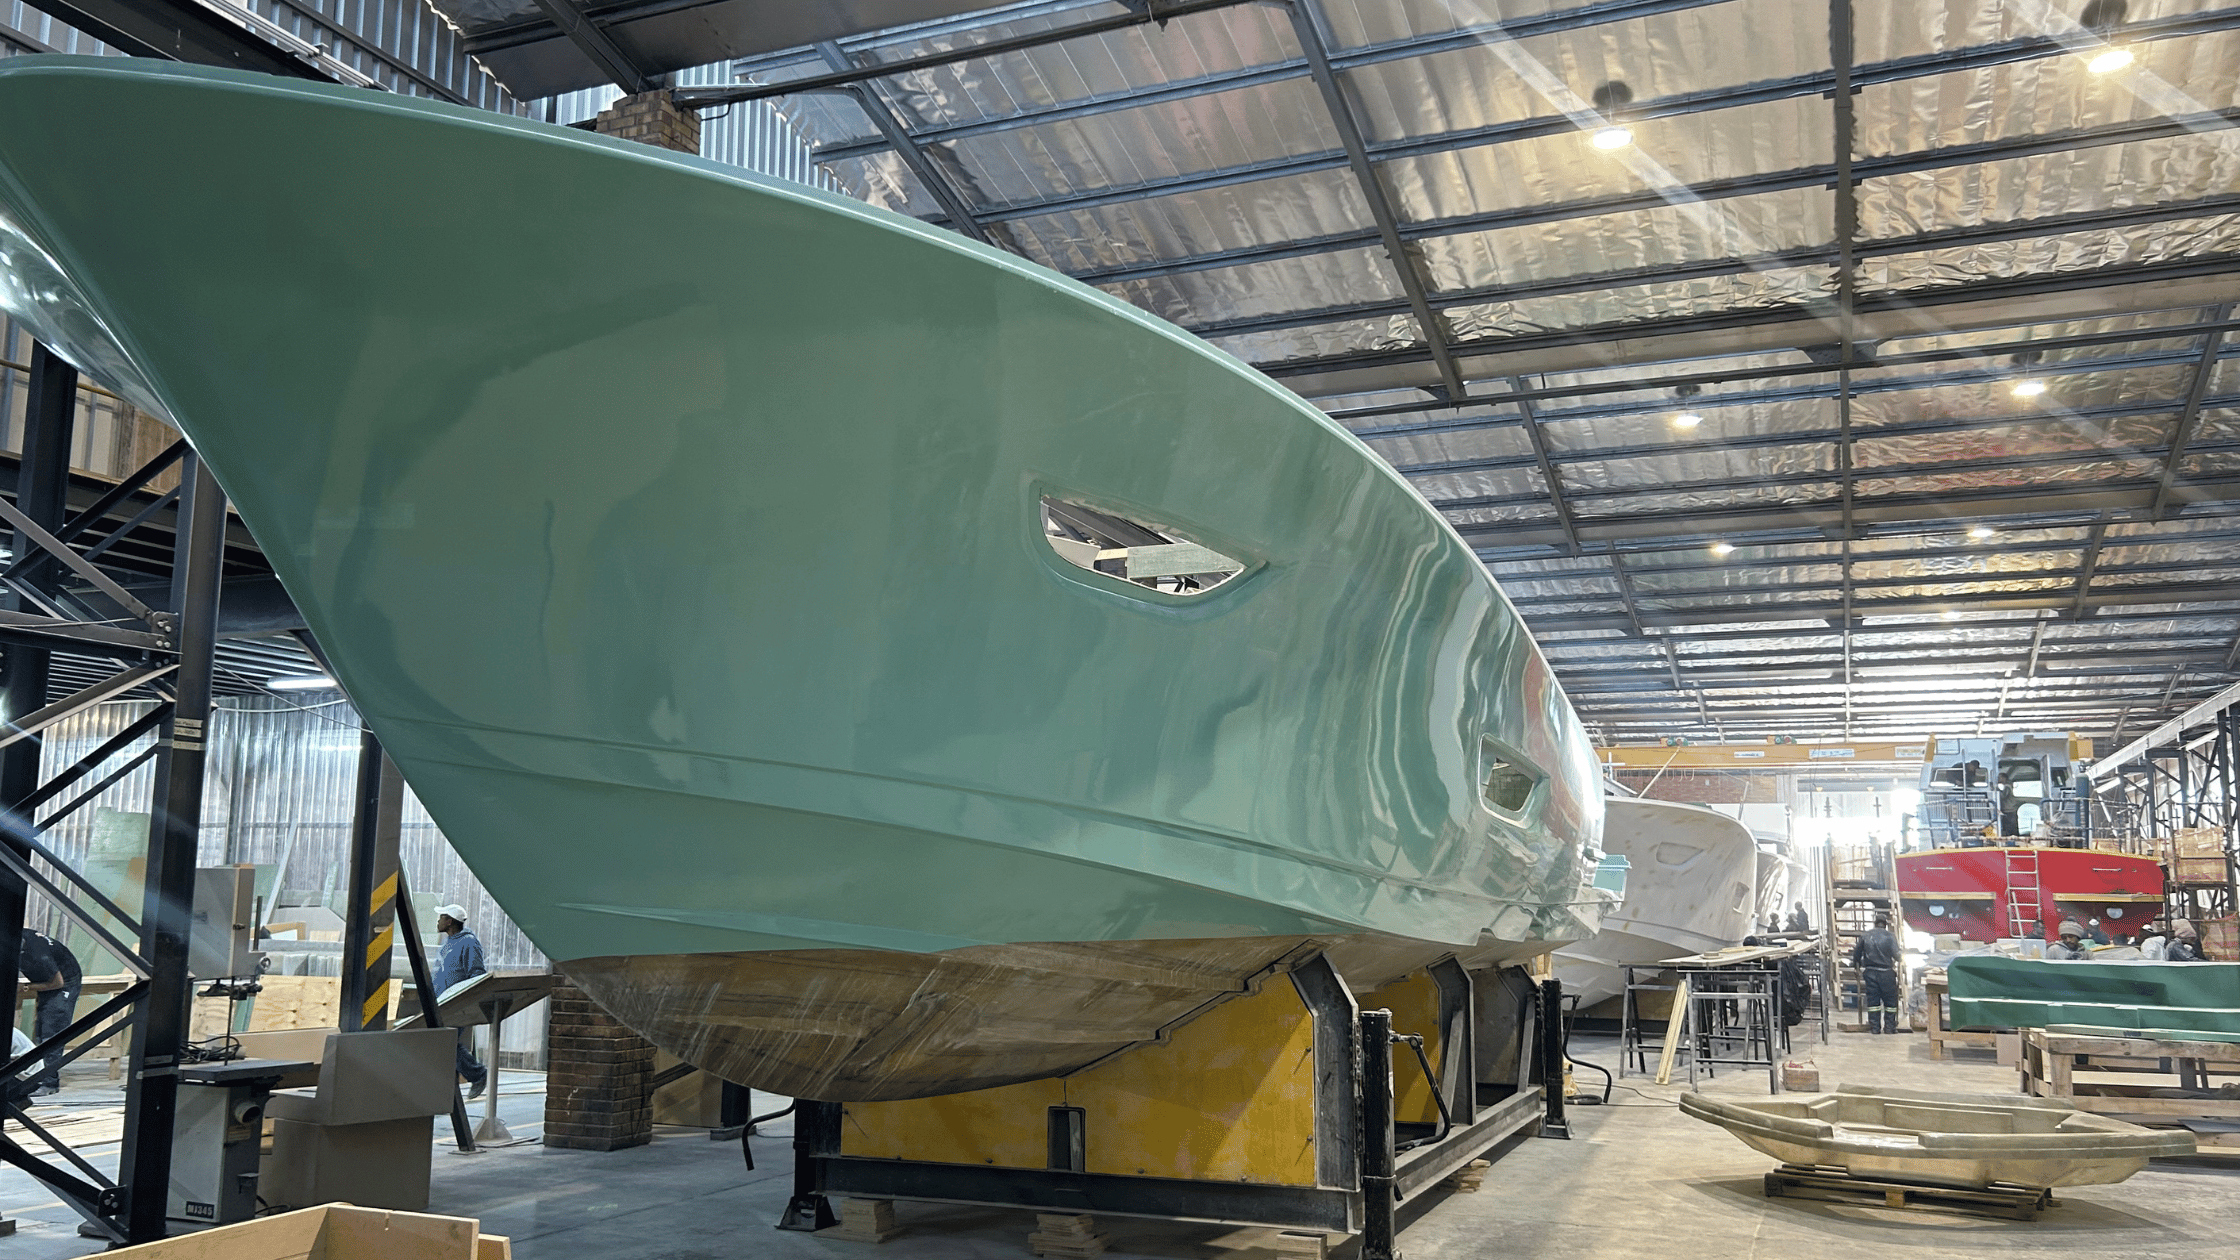 505 hull #001 in the ECLIPSE factory. 